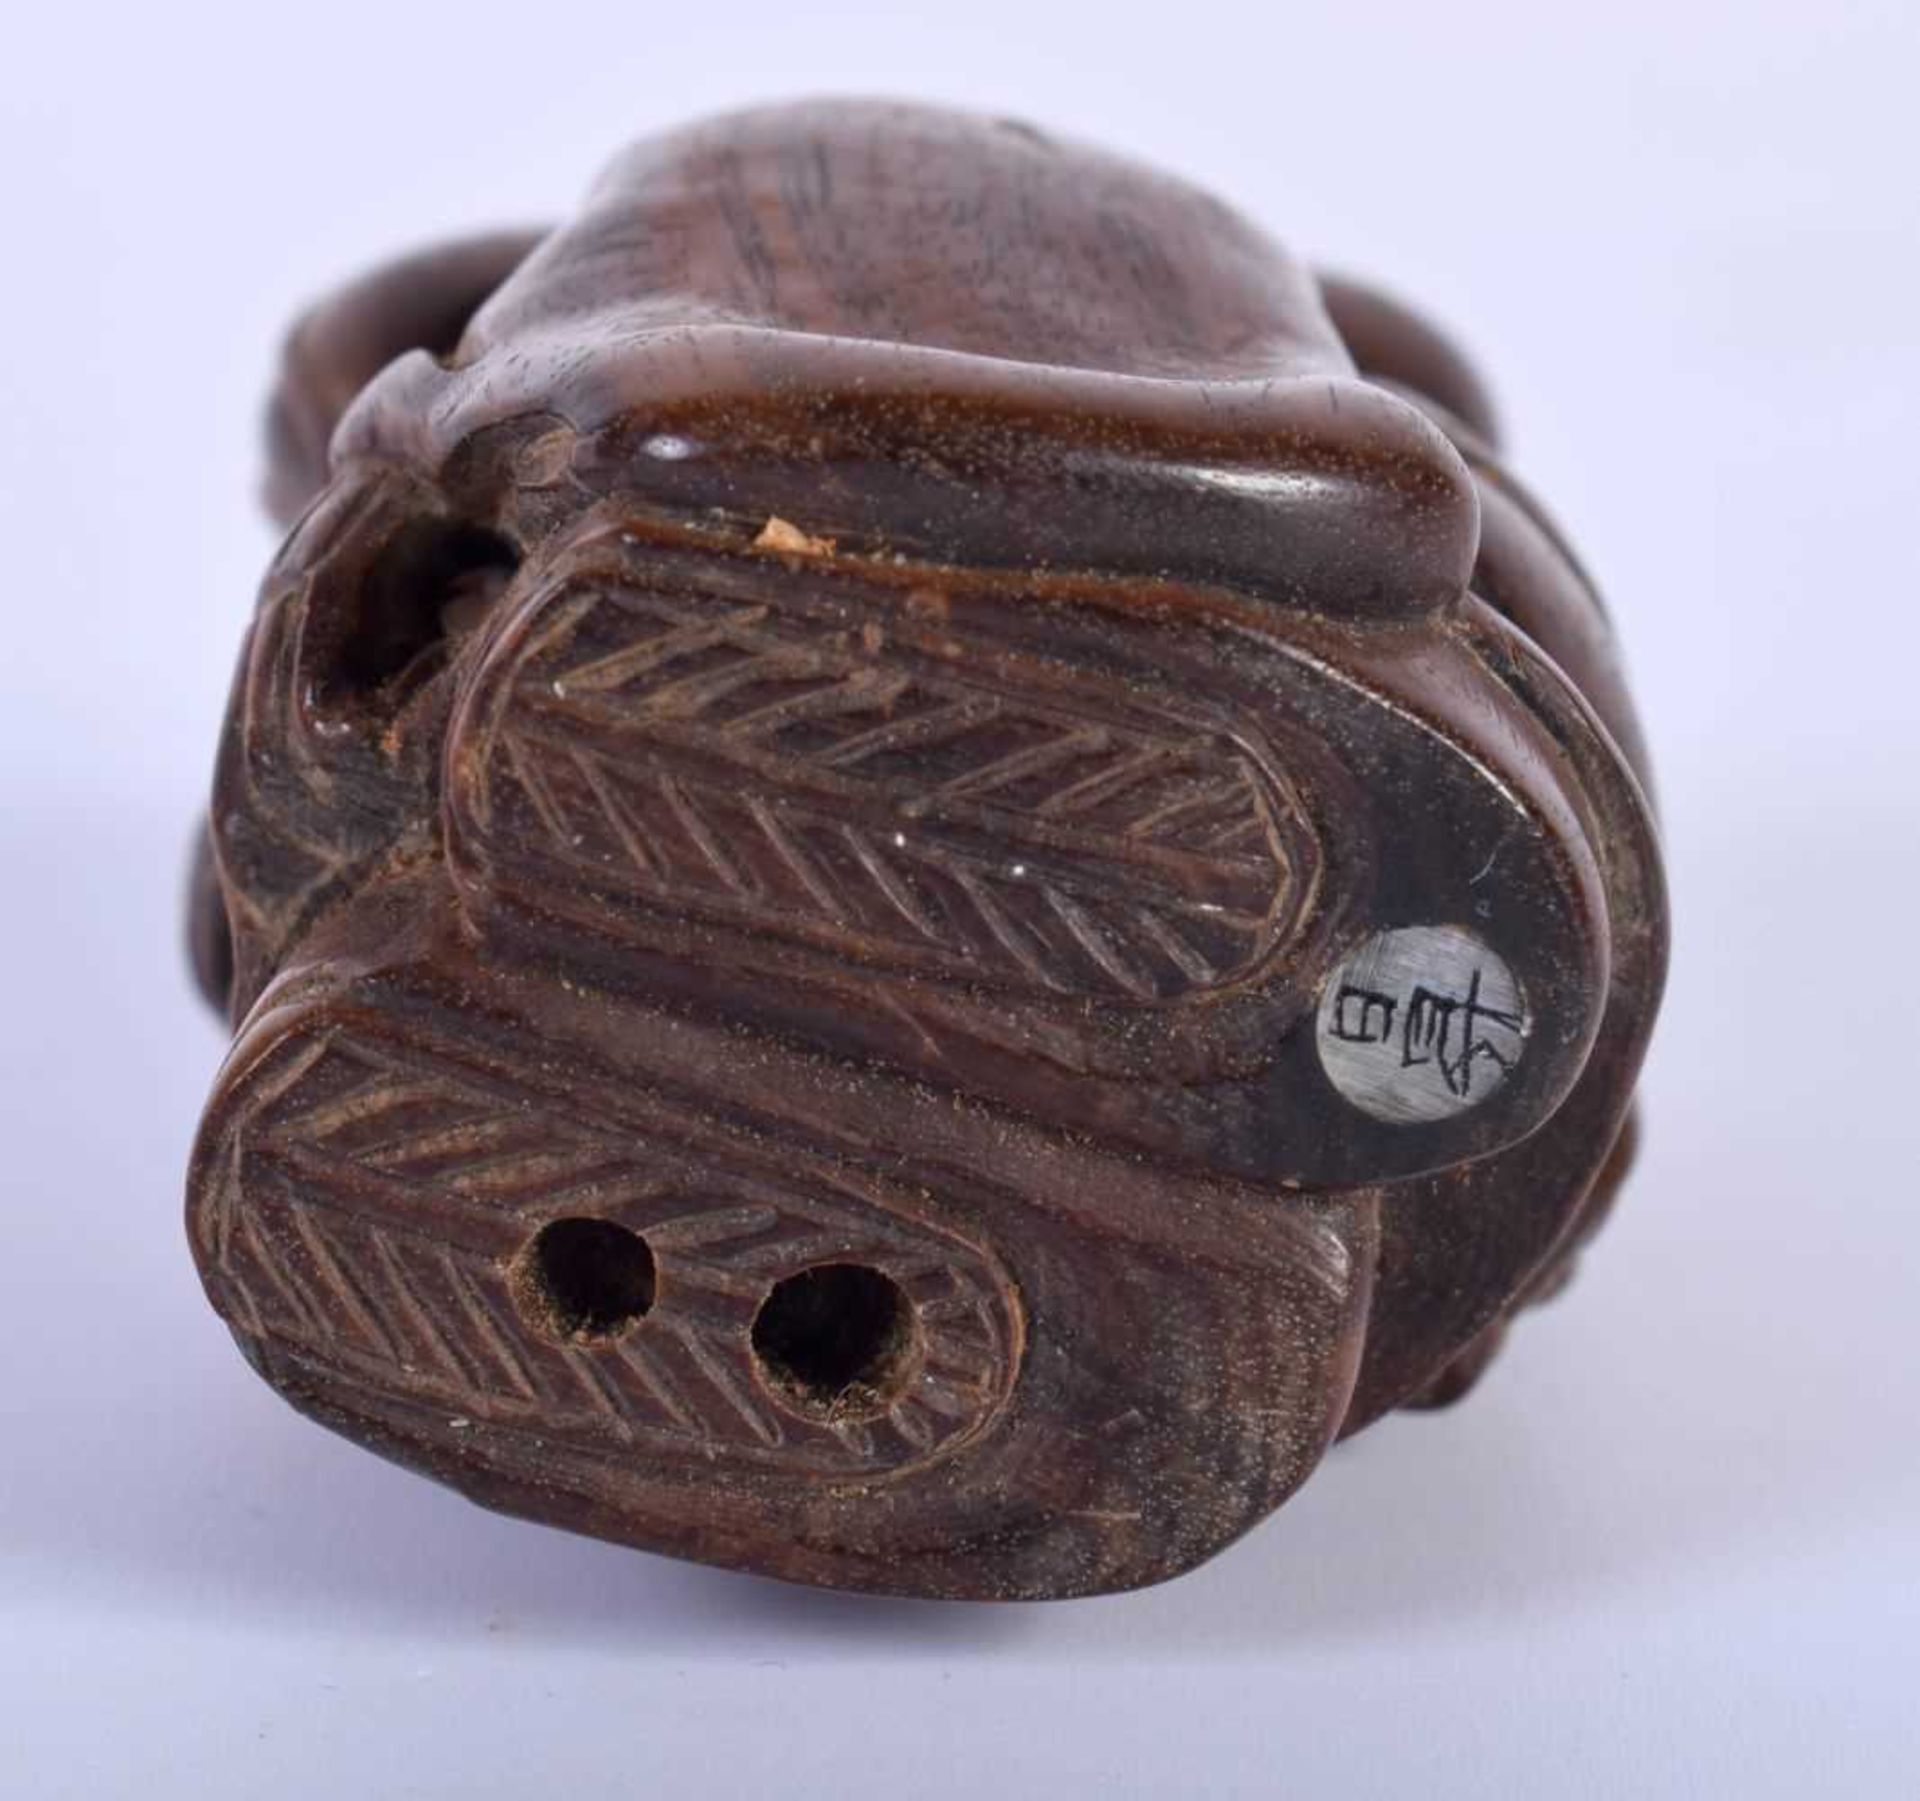 A Carved Hardwood Netsuke of a Male. 5.4cm x 3.2cm x 3.8cm. Weight 47g - Image 3 of 3